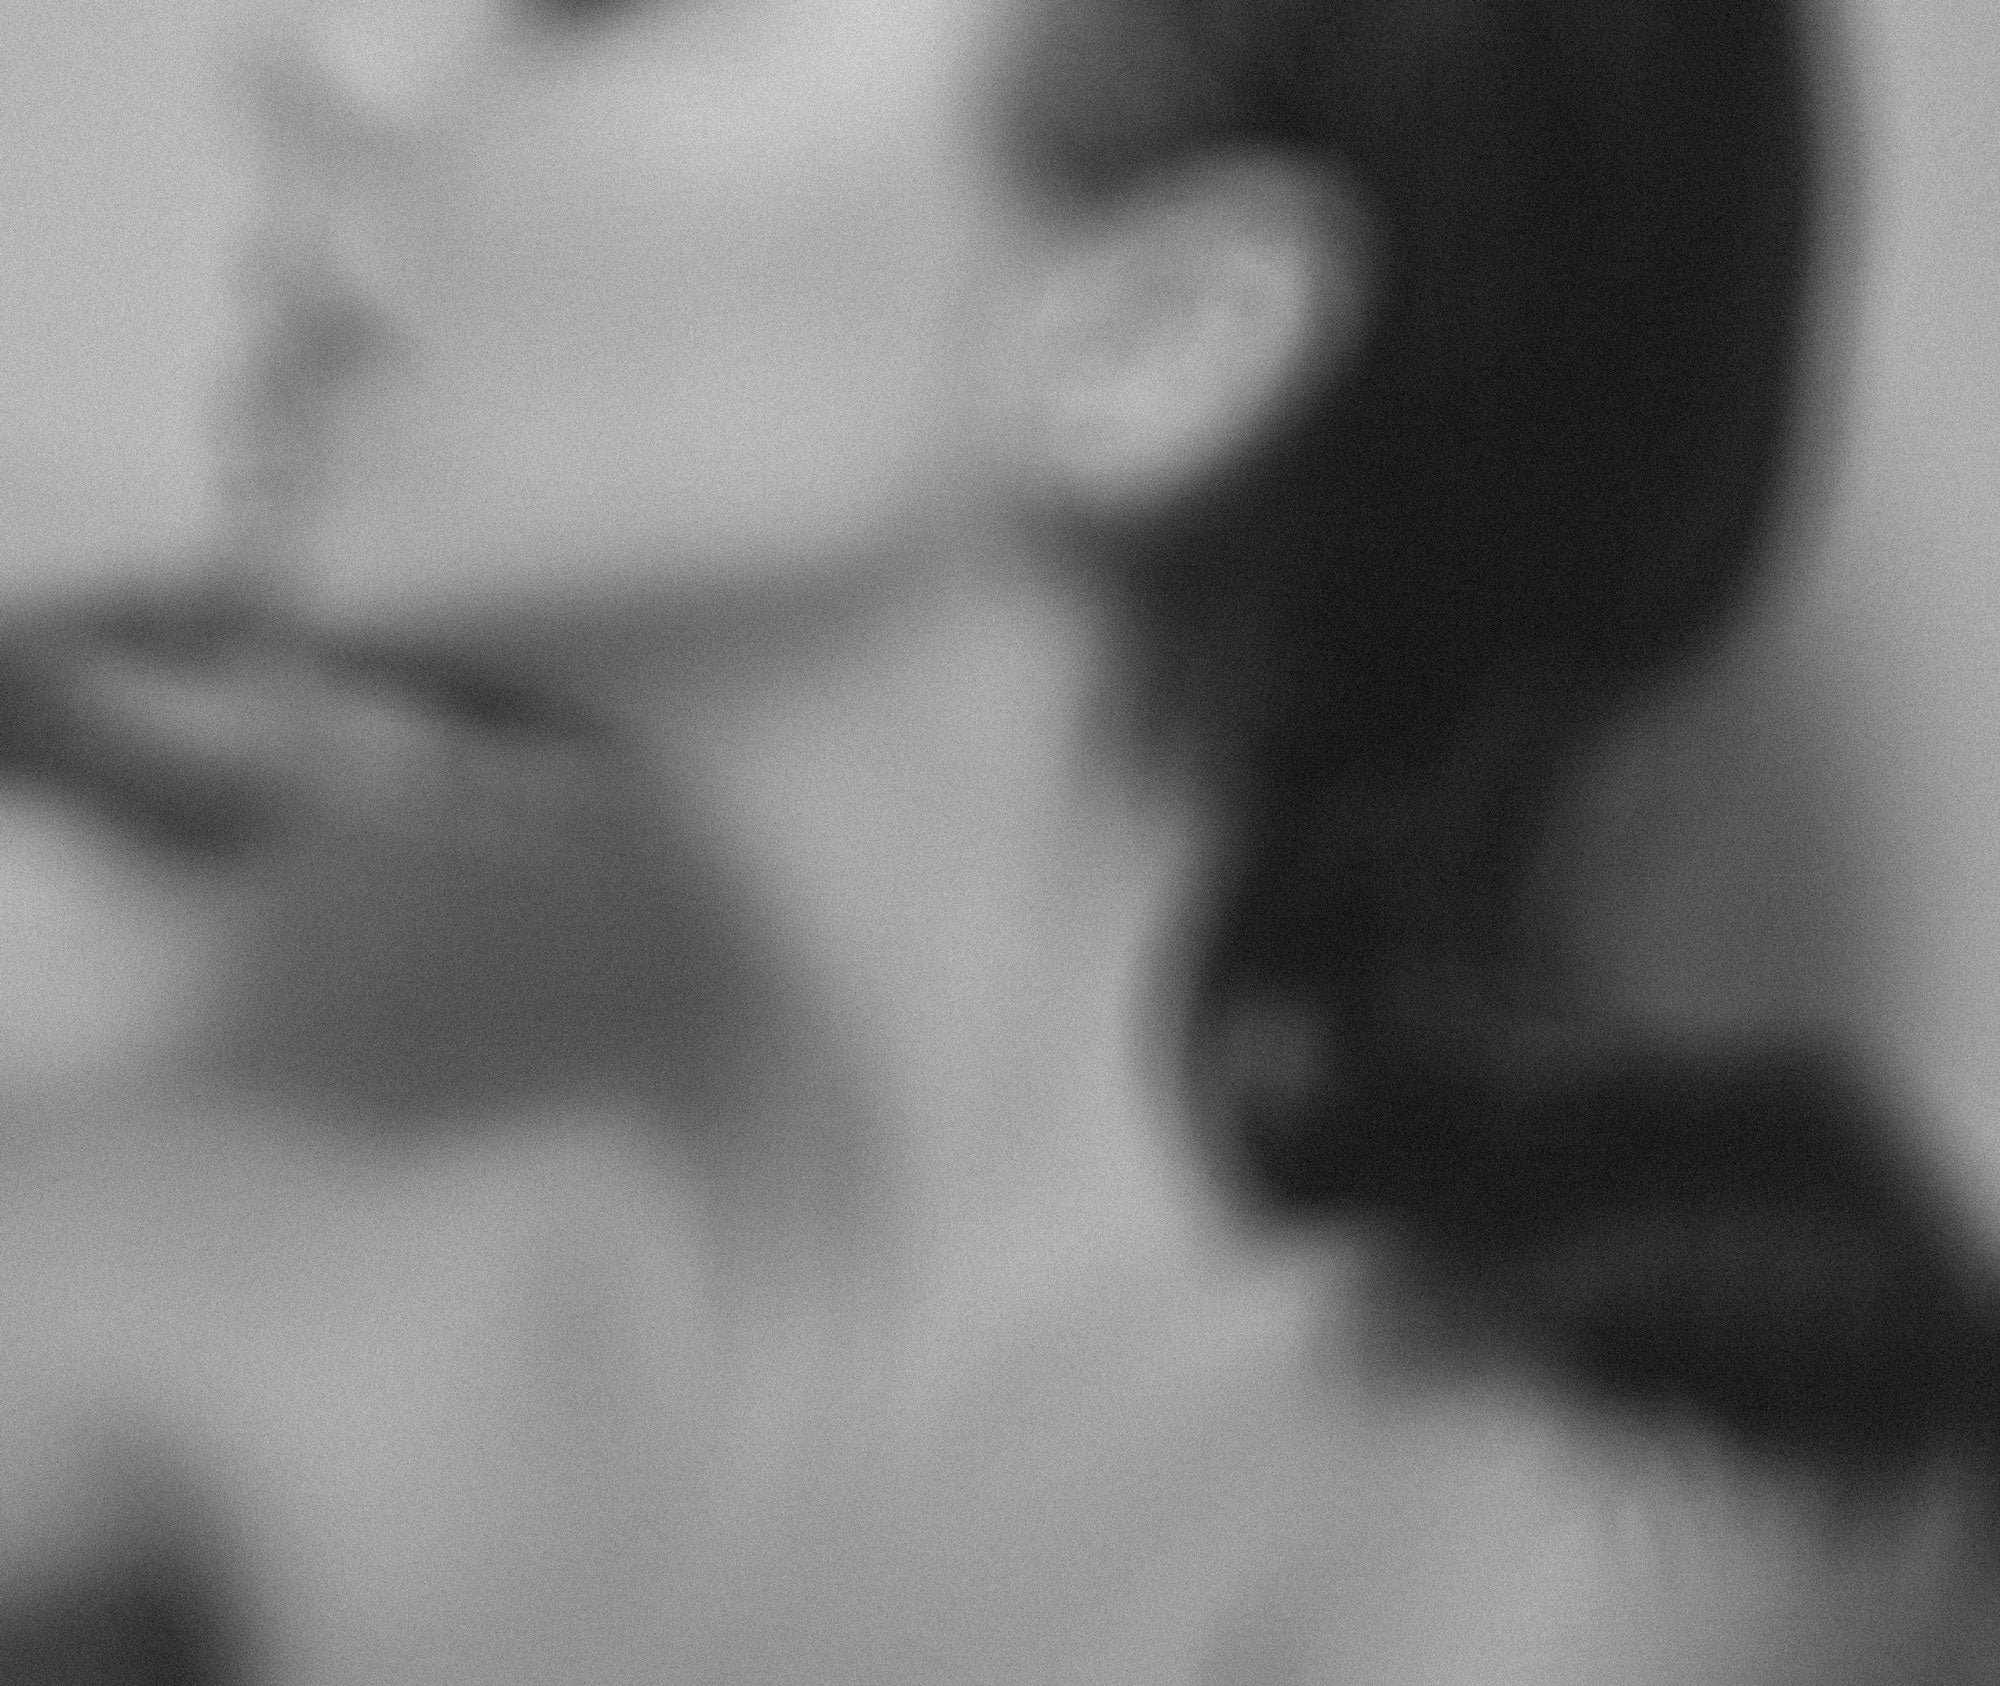 Blurry black and white image of brunette woman looking towards her left.